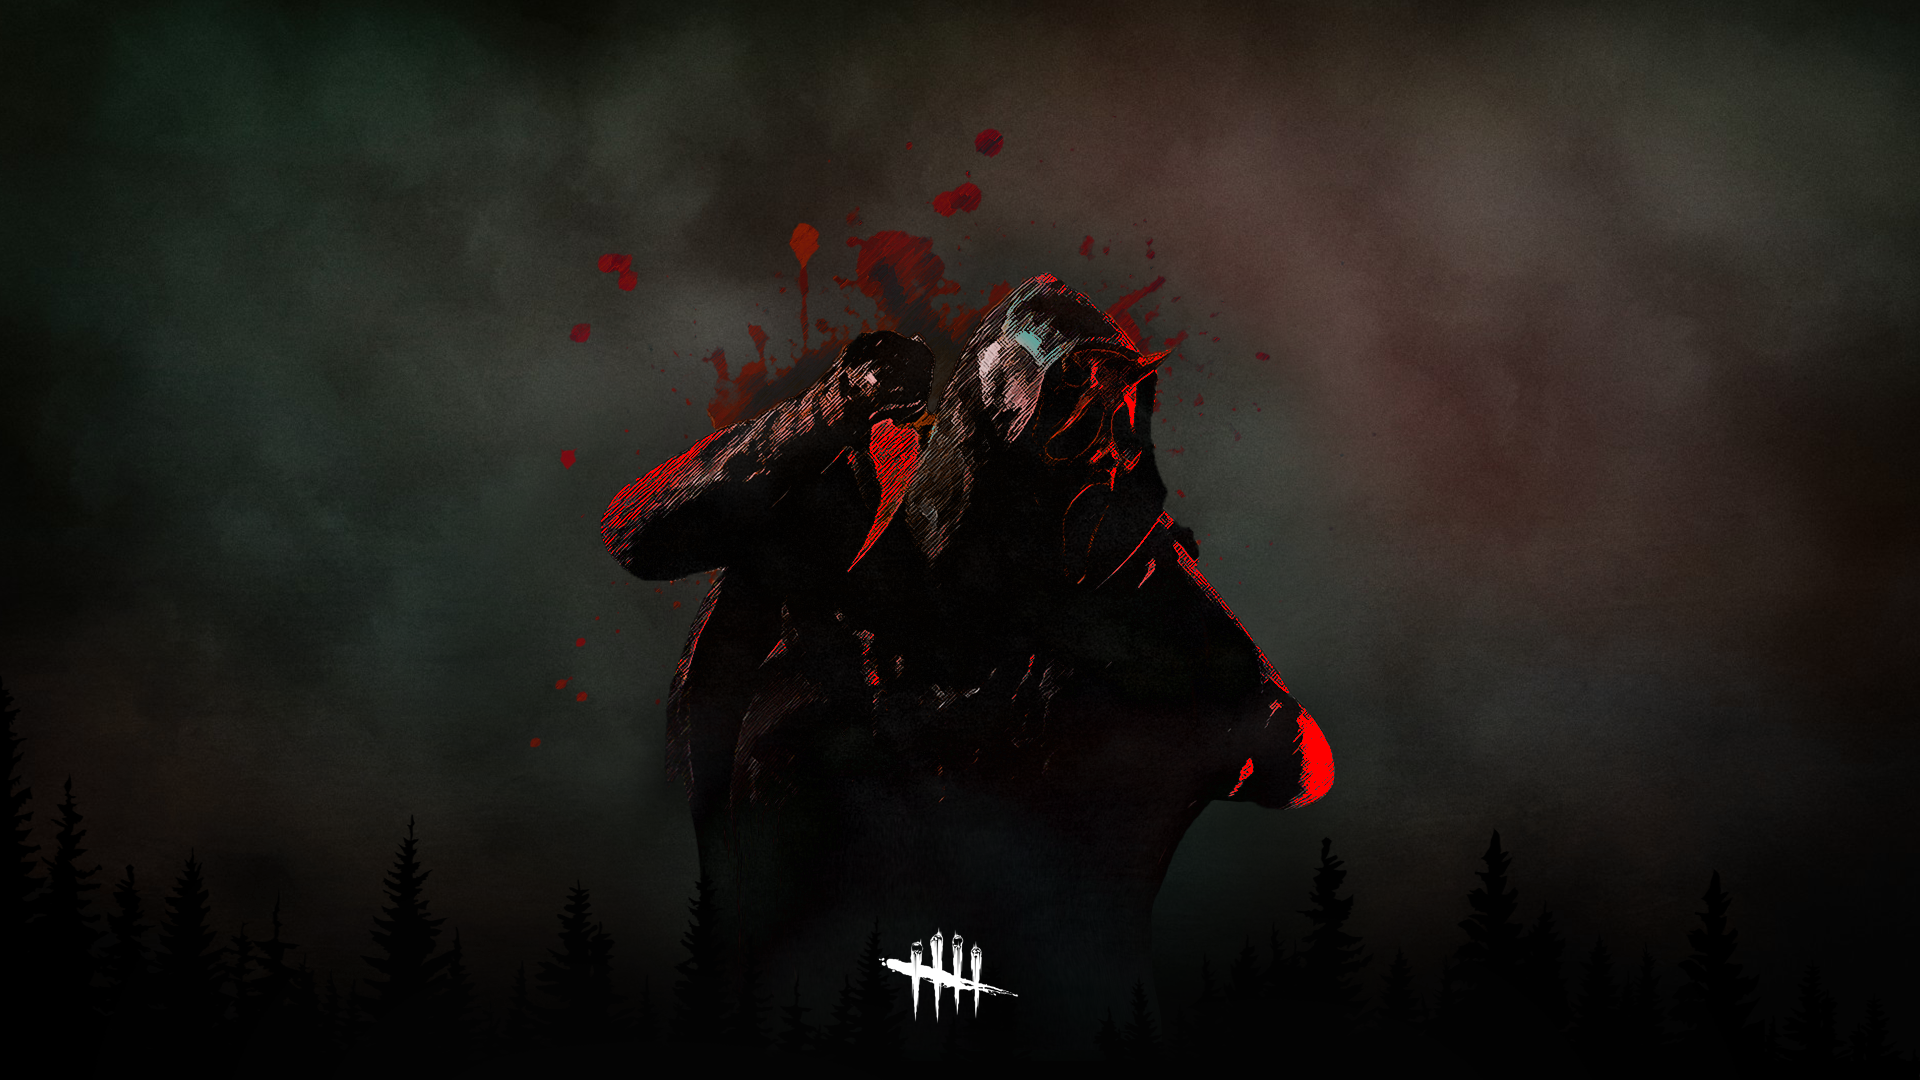 Made another Ghostface (devil mask) wallpaper (1920x1080) for anyone who's interested: deadbydaylight